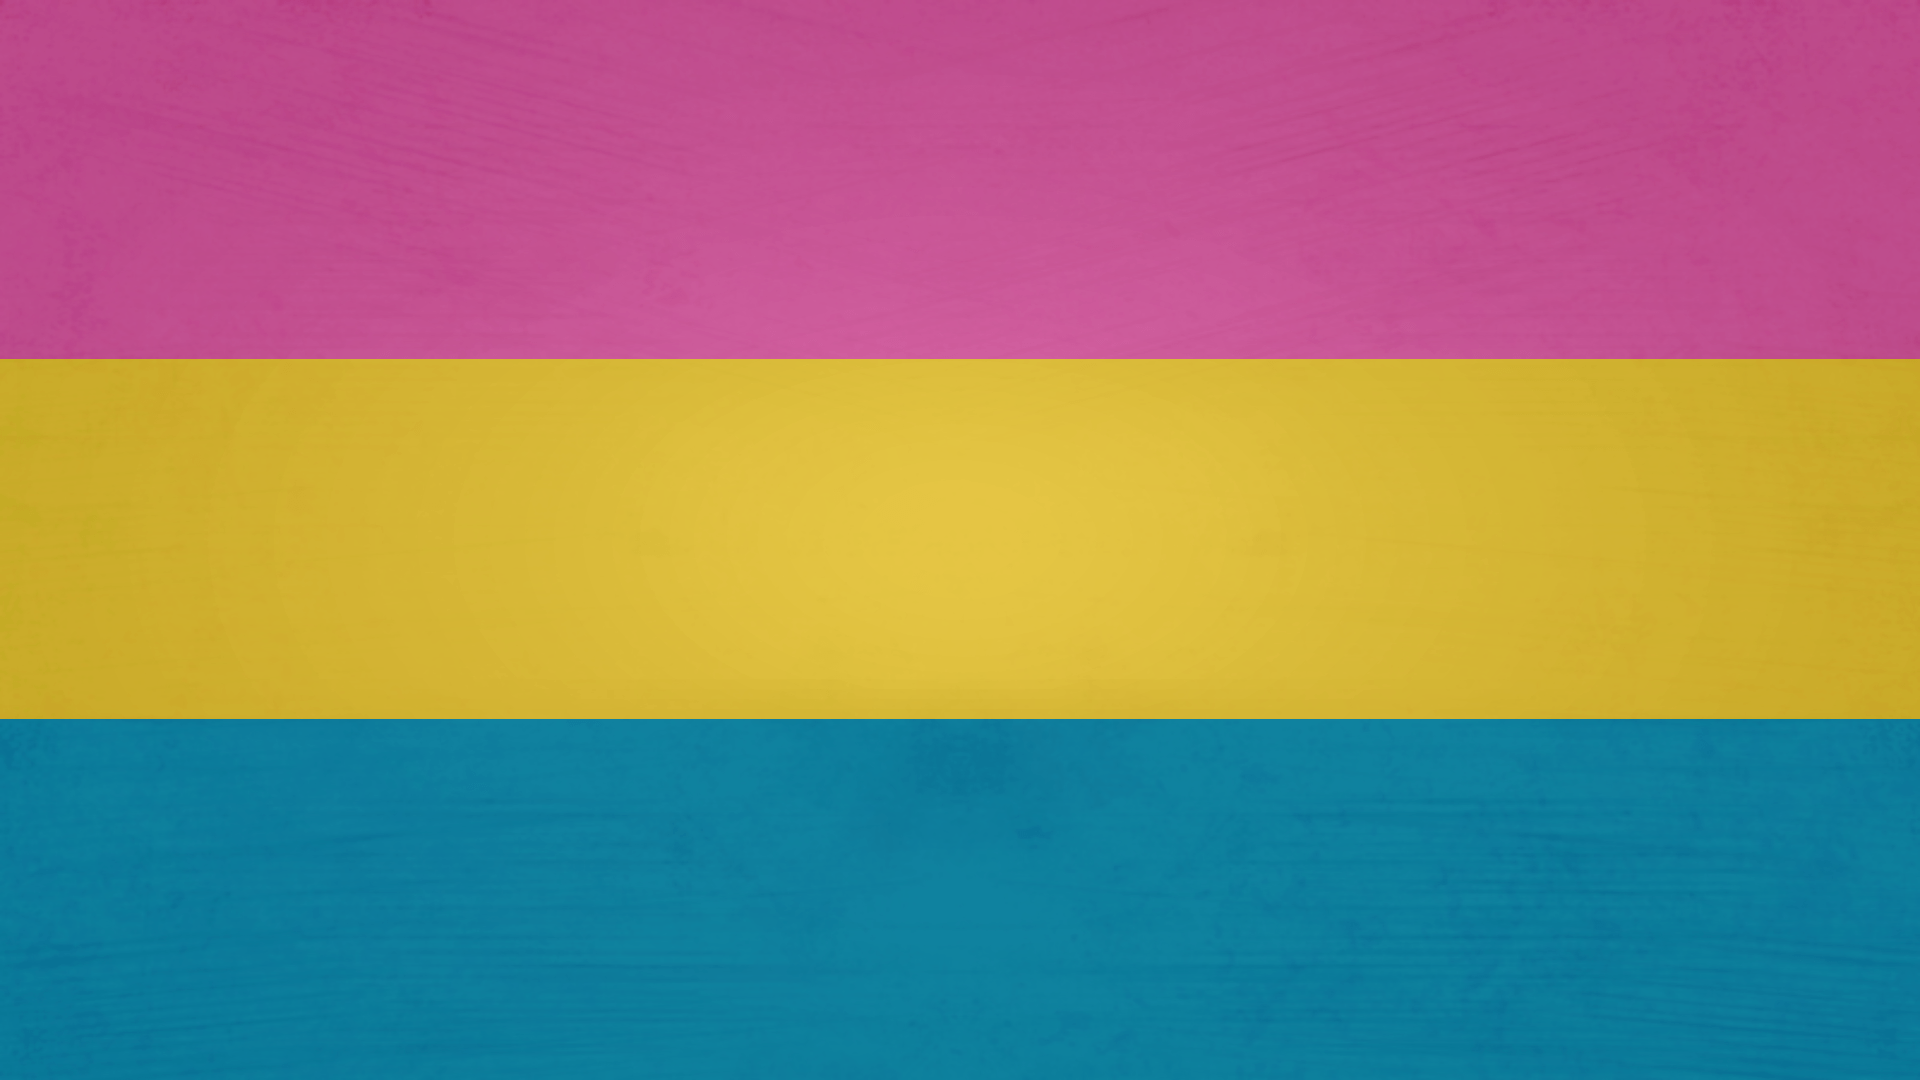 Made a pansexual flag desktop background! : pansexual.